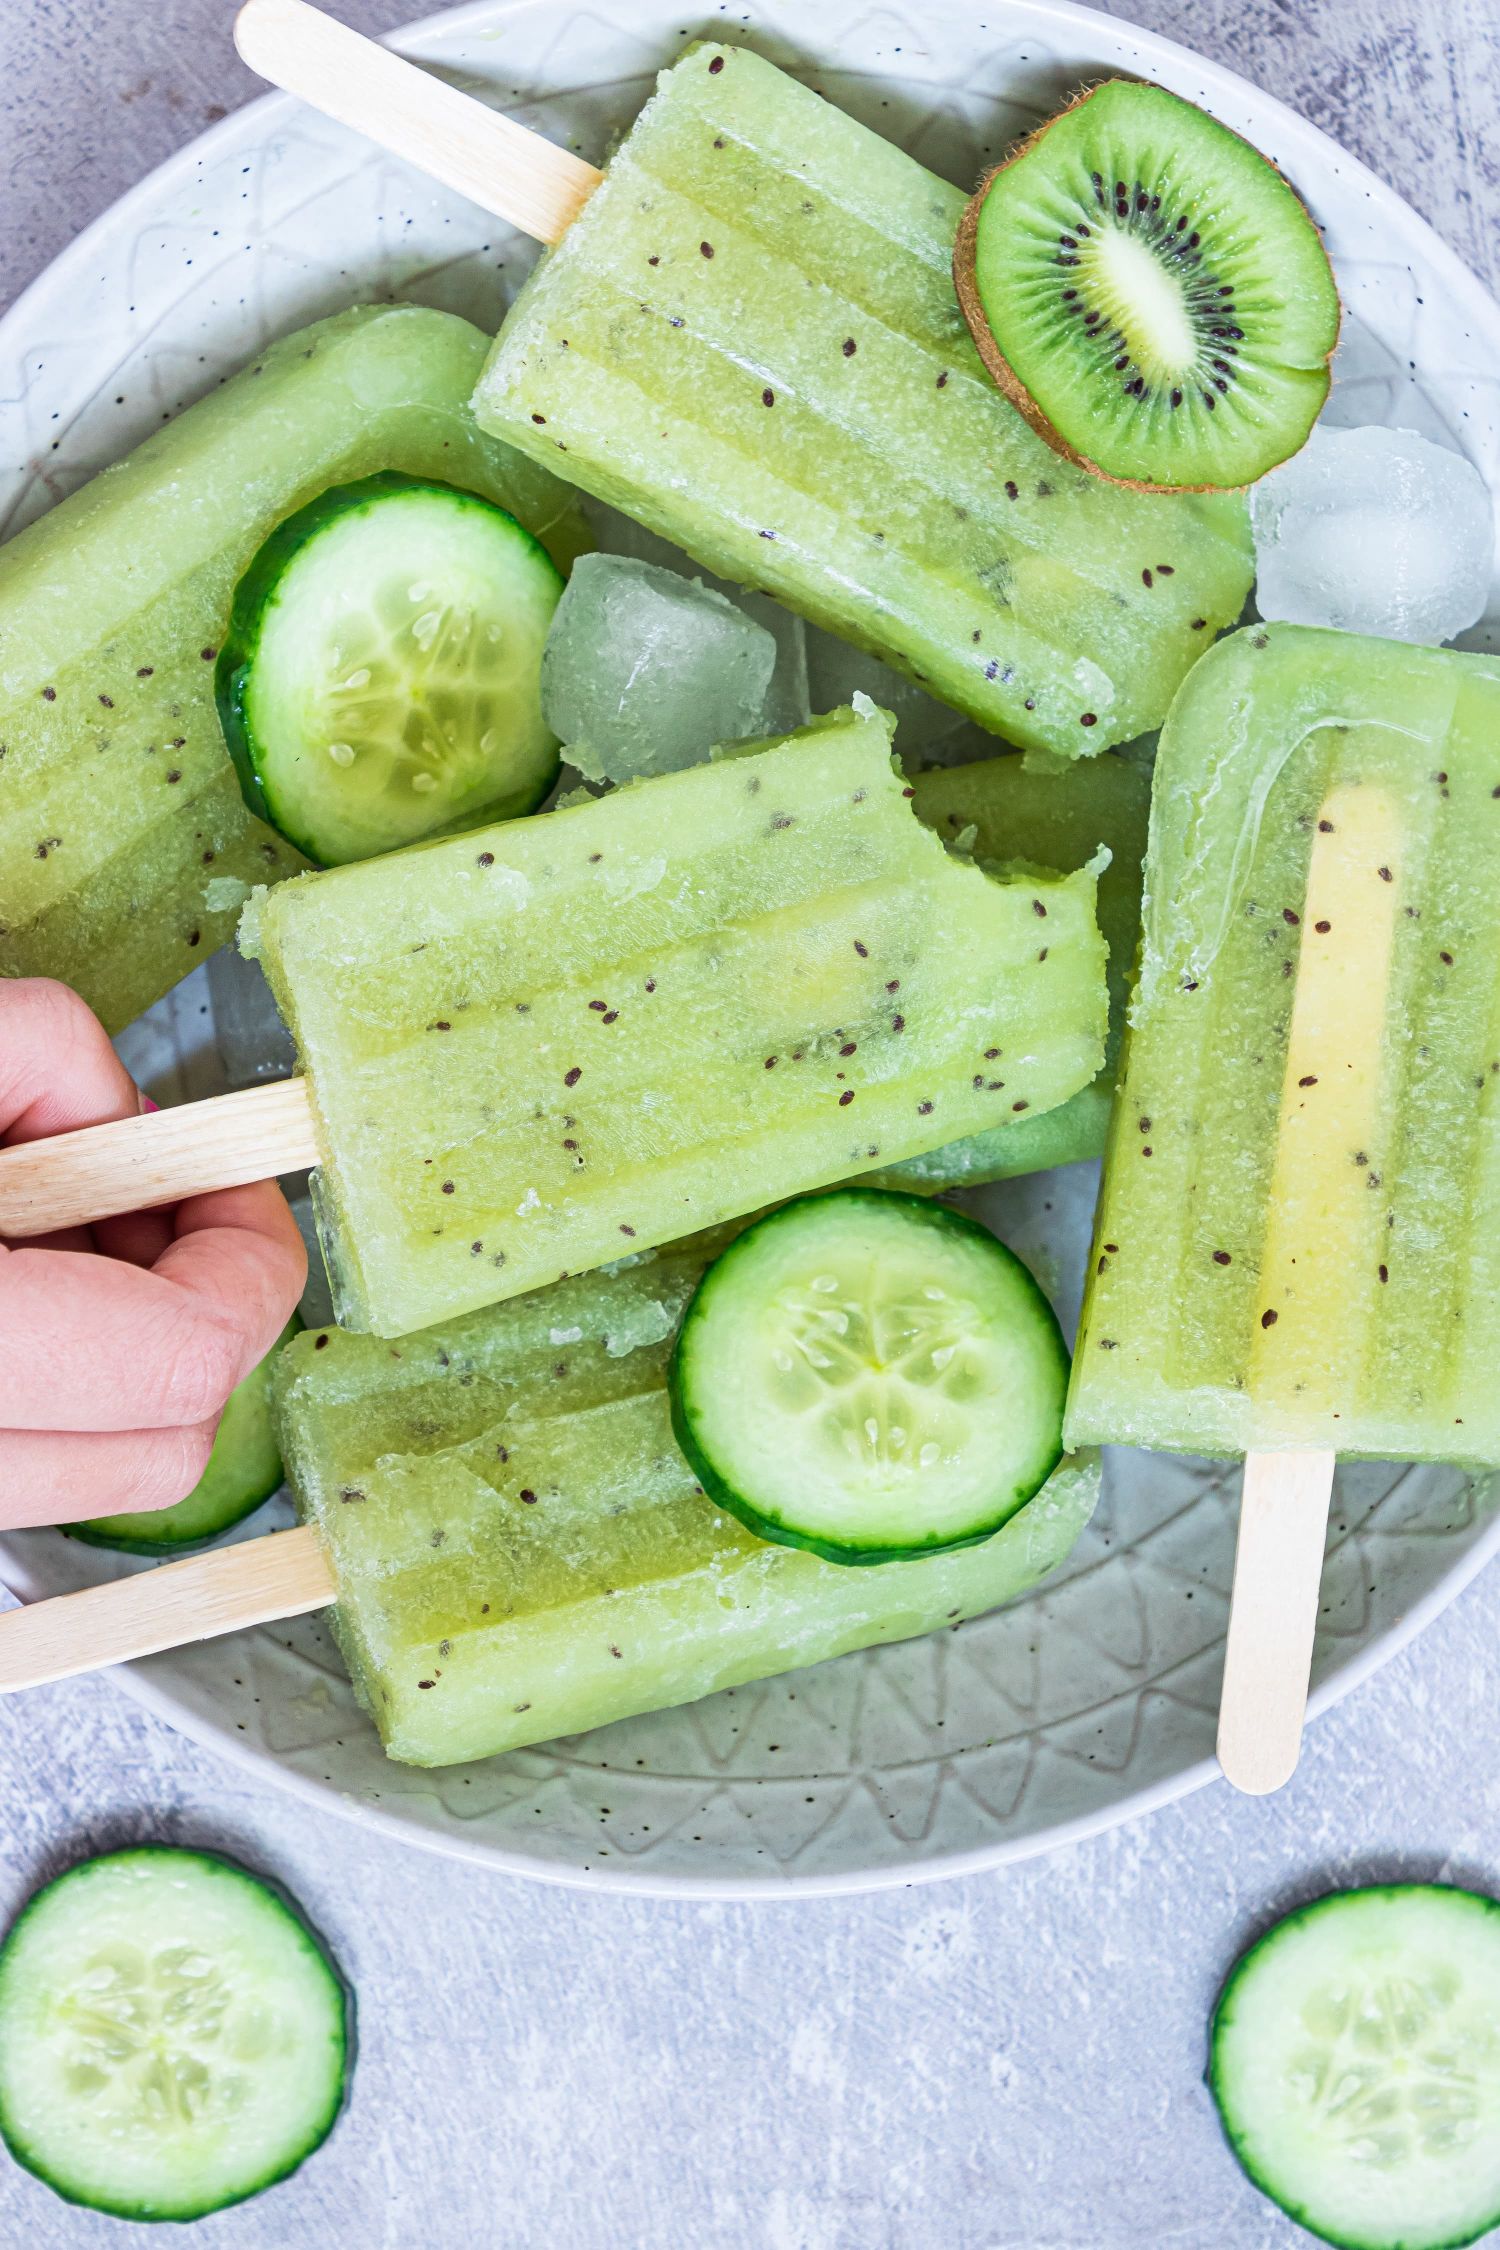 Homemade cucumber popsicles with fresh slices of cucumber and kiwi on a plate.